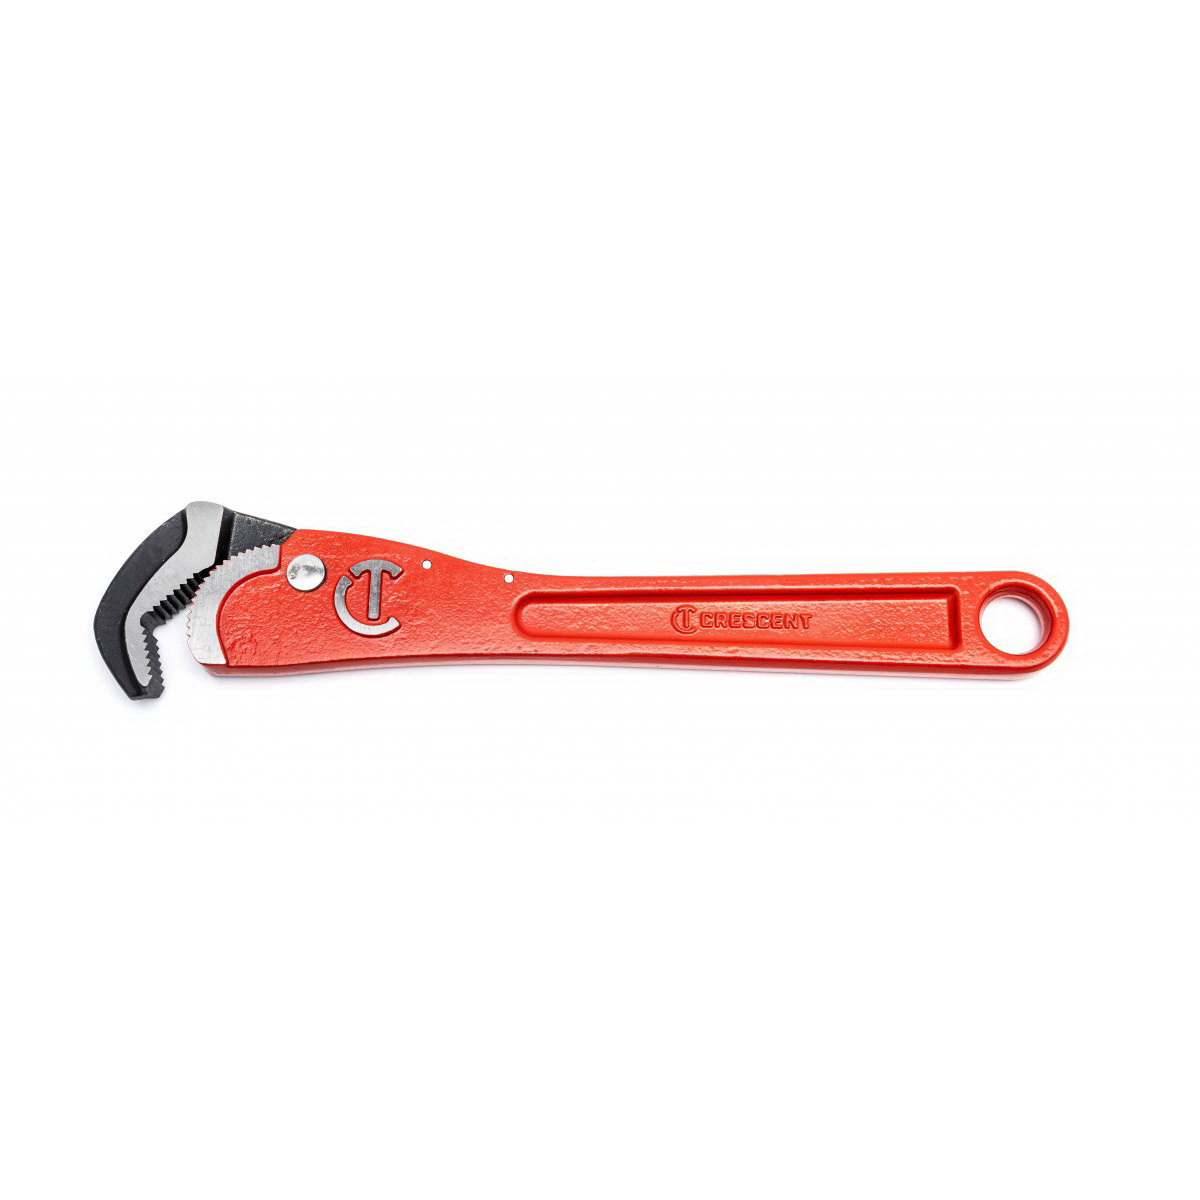 CPW12S Pipe Wrench, 0 to 1-1/2 in Jaw, 12 in L, Steel, Powder-Coated